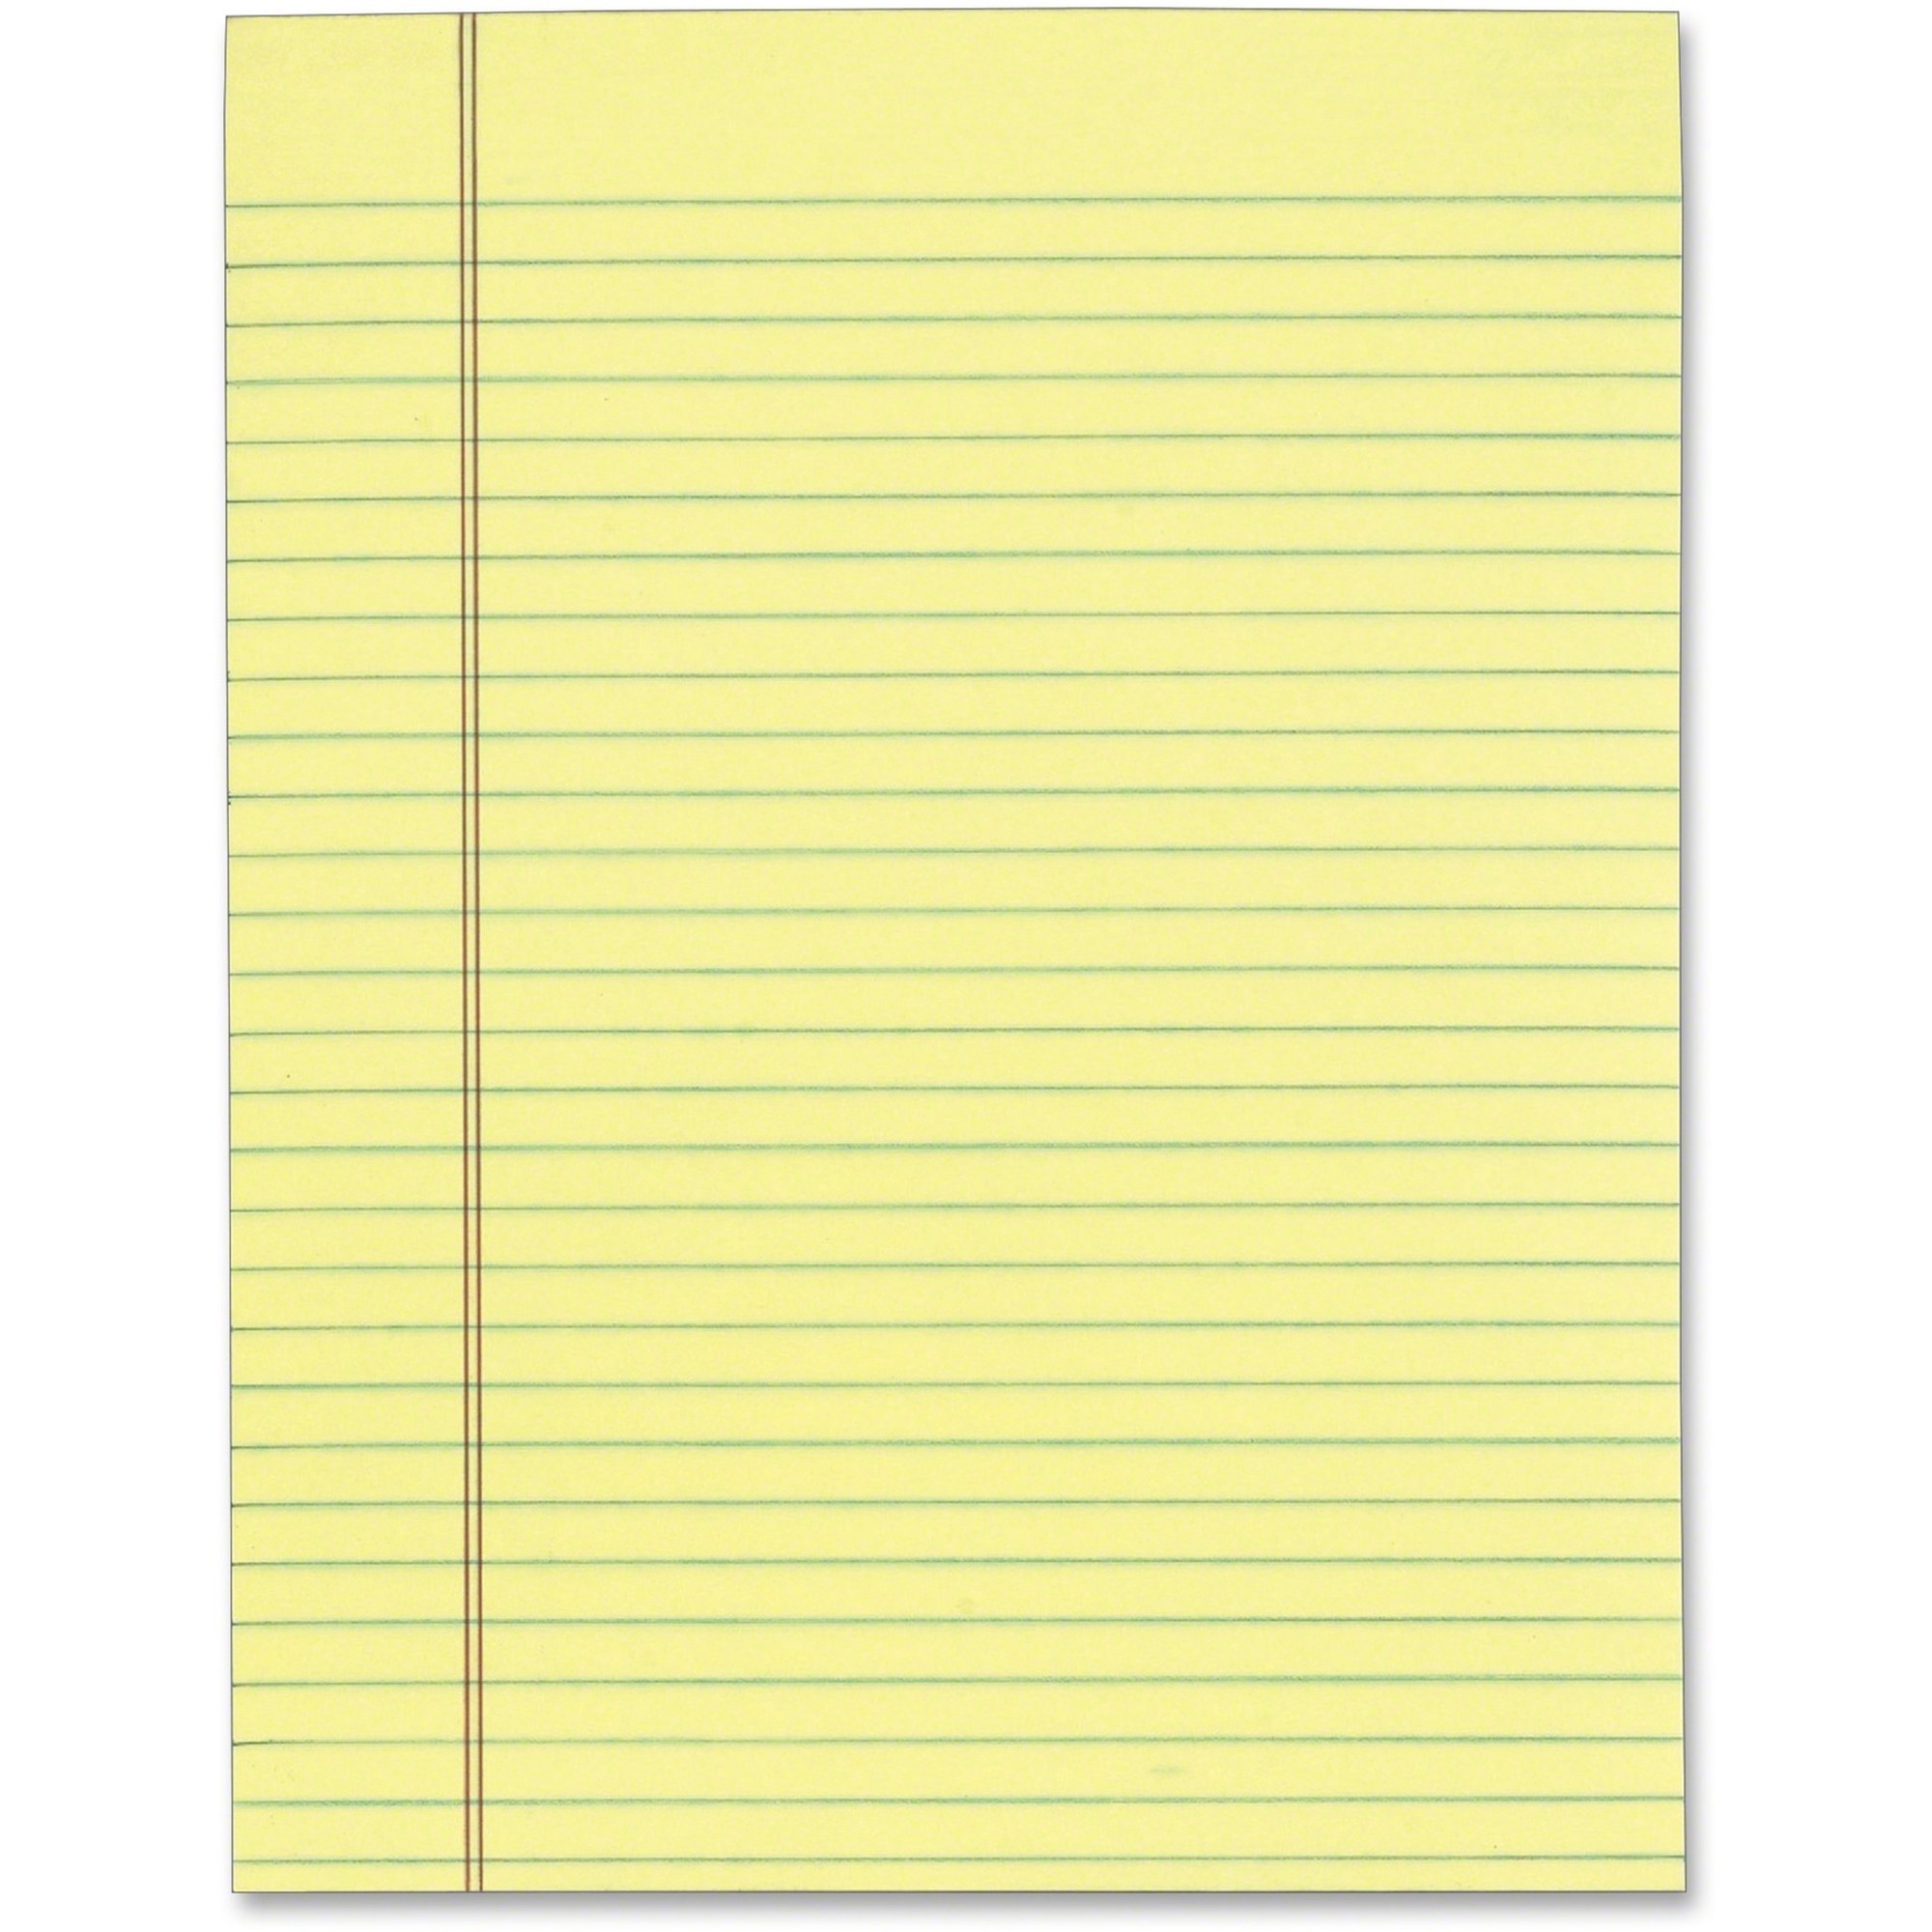 Tops 7522 Gum Top Pad - 50 Sheets - Glue - Ruled Red Margin - 16 lb Basis Weight - Letter - 8 1/2" x 11" - Canary Paper - Perfor